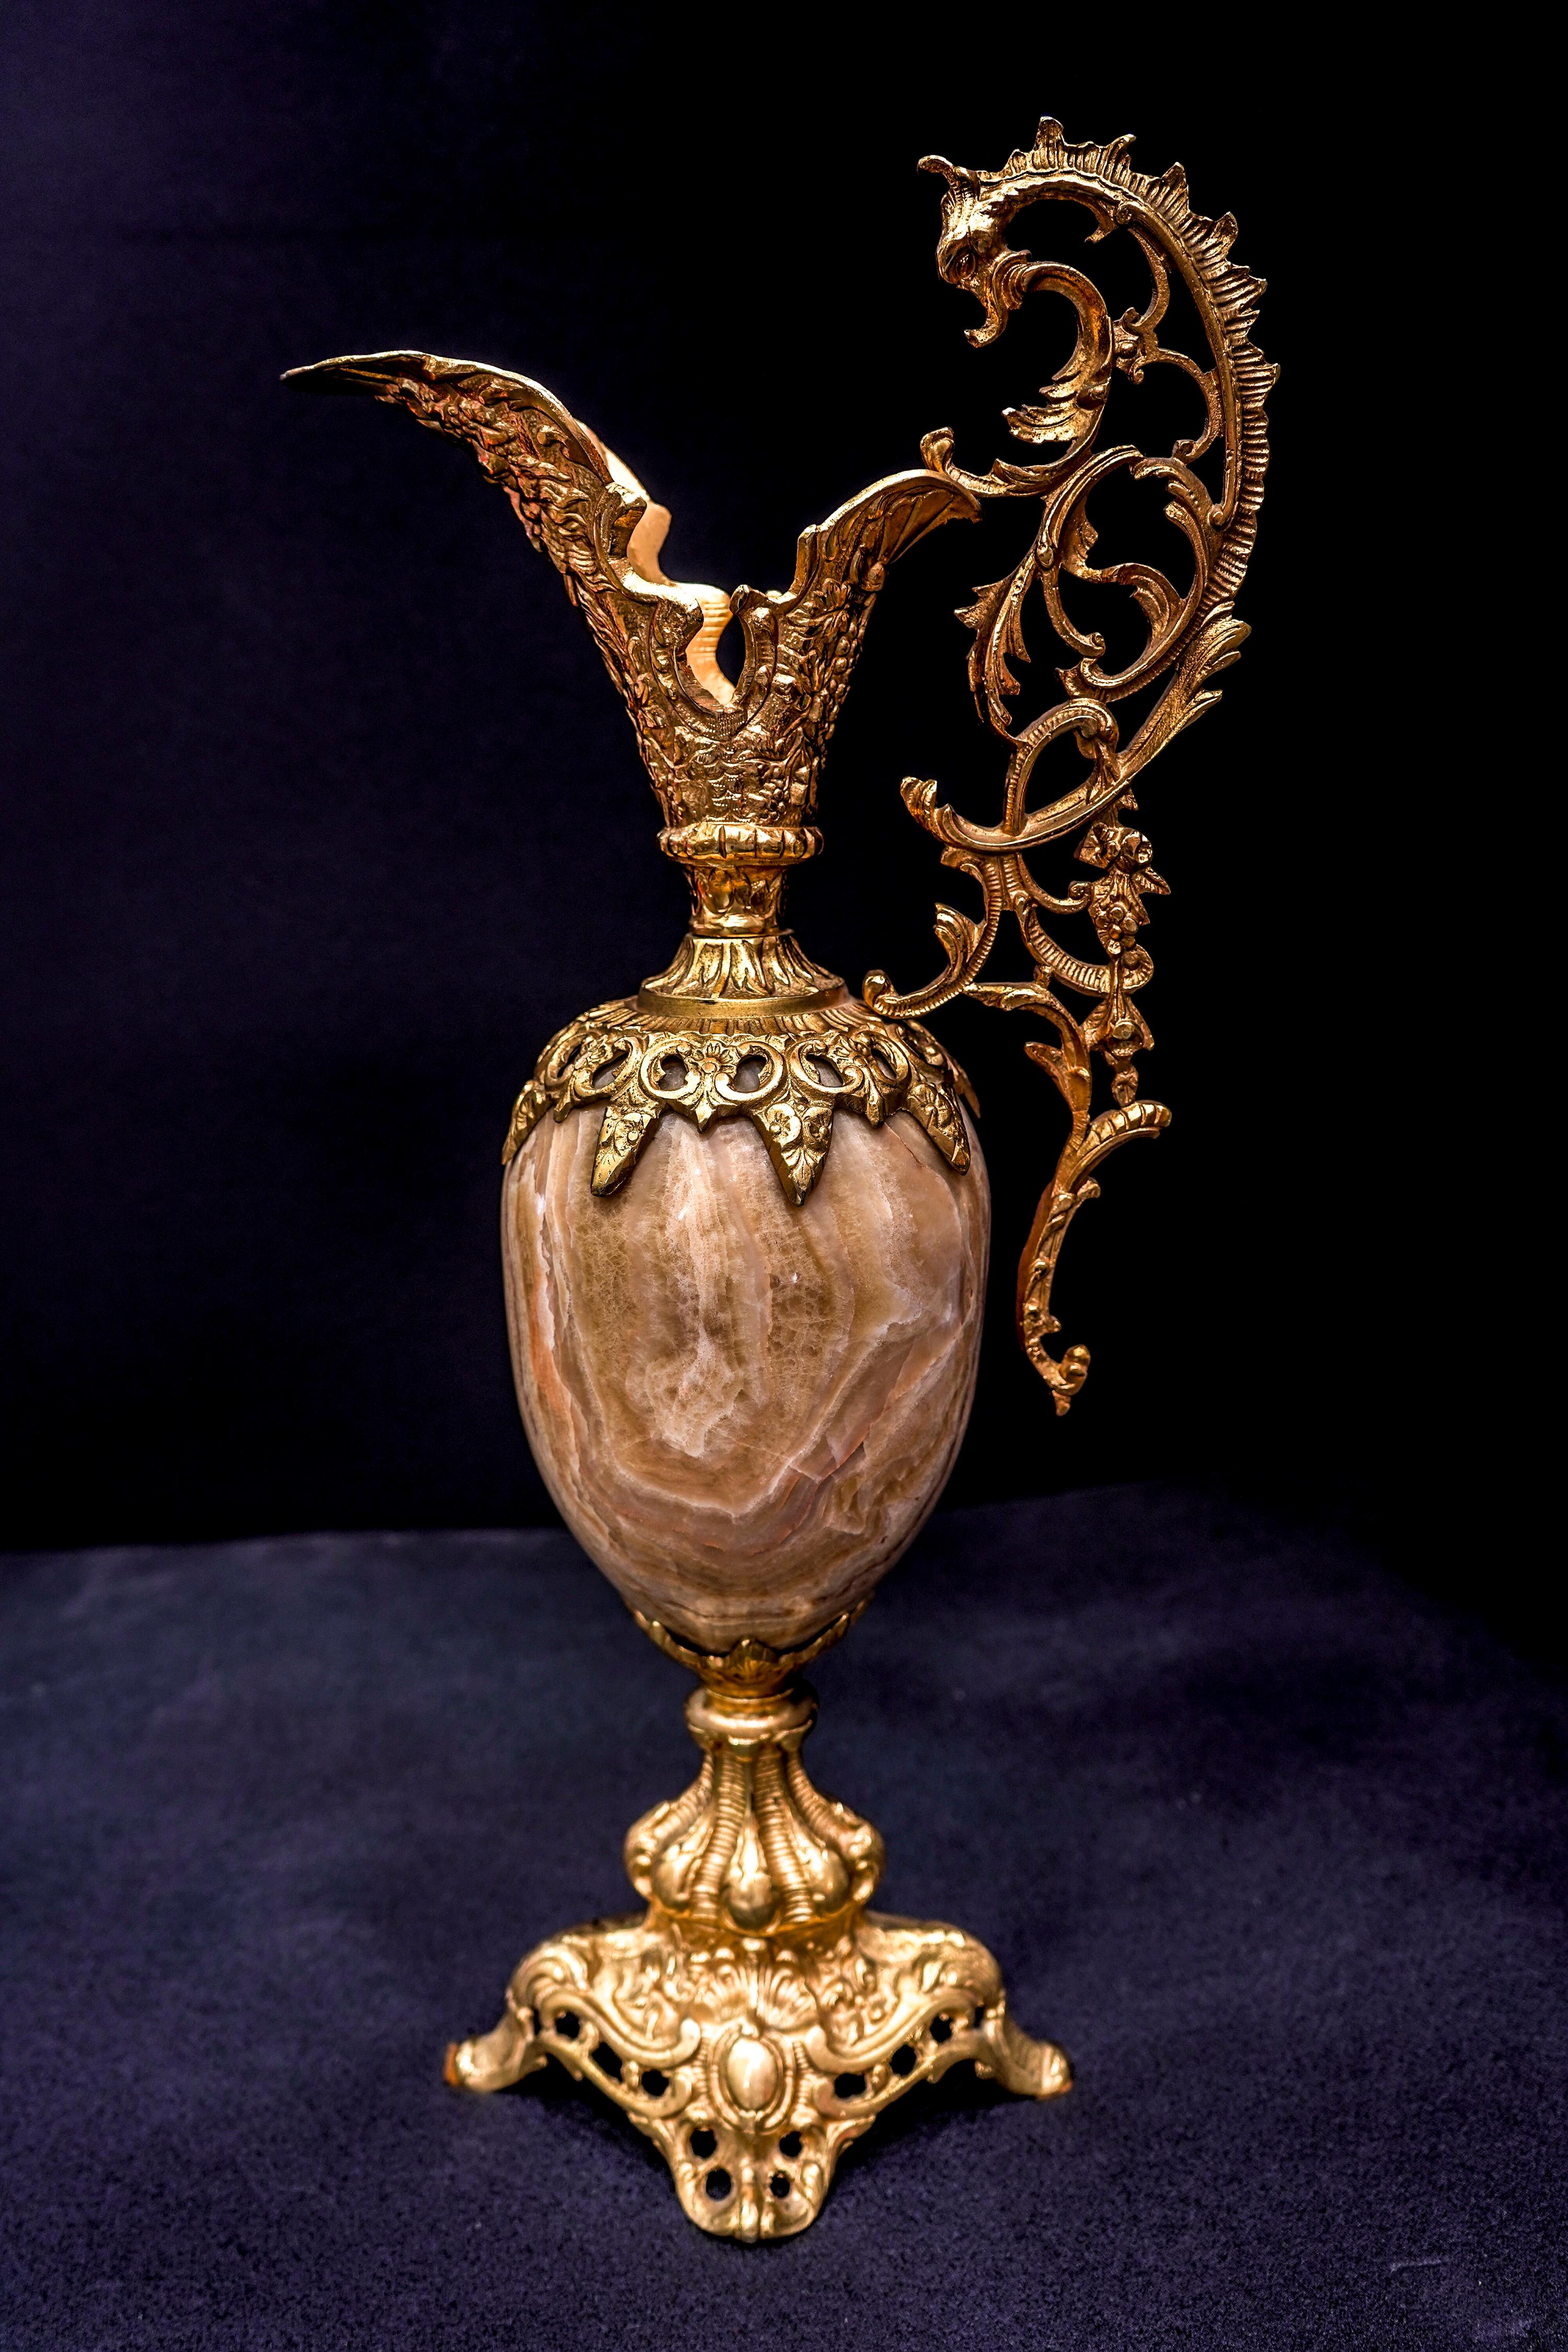 Amazing 19th century golden bronze ( ormolu) and agate stone Spanish Baroque style Amphore. The golden bronze has rockeries, scrolls and a medallion of the god Bacchus on the back of the mouth.
Beautiful and stunning piece of collection, very